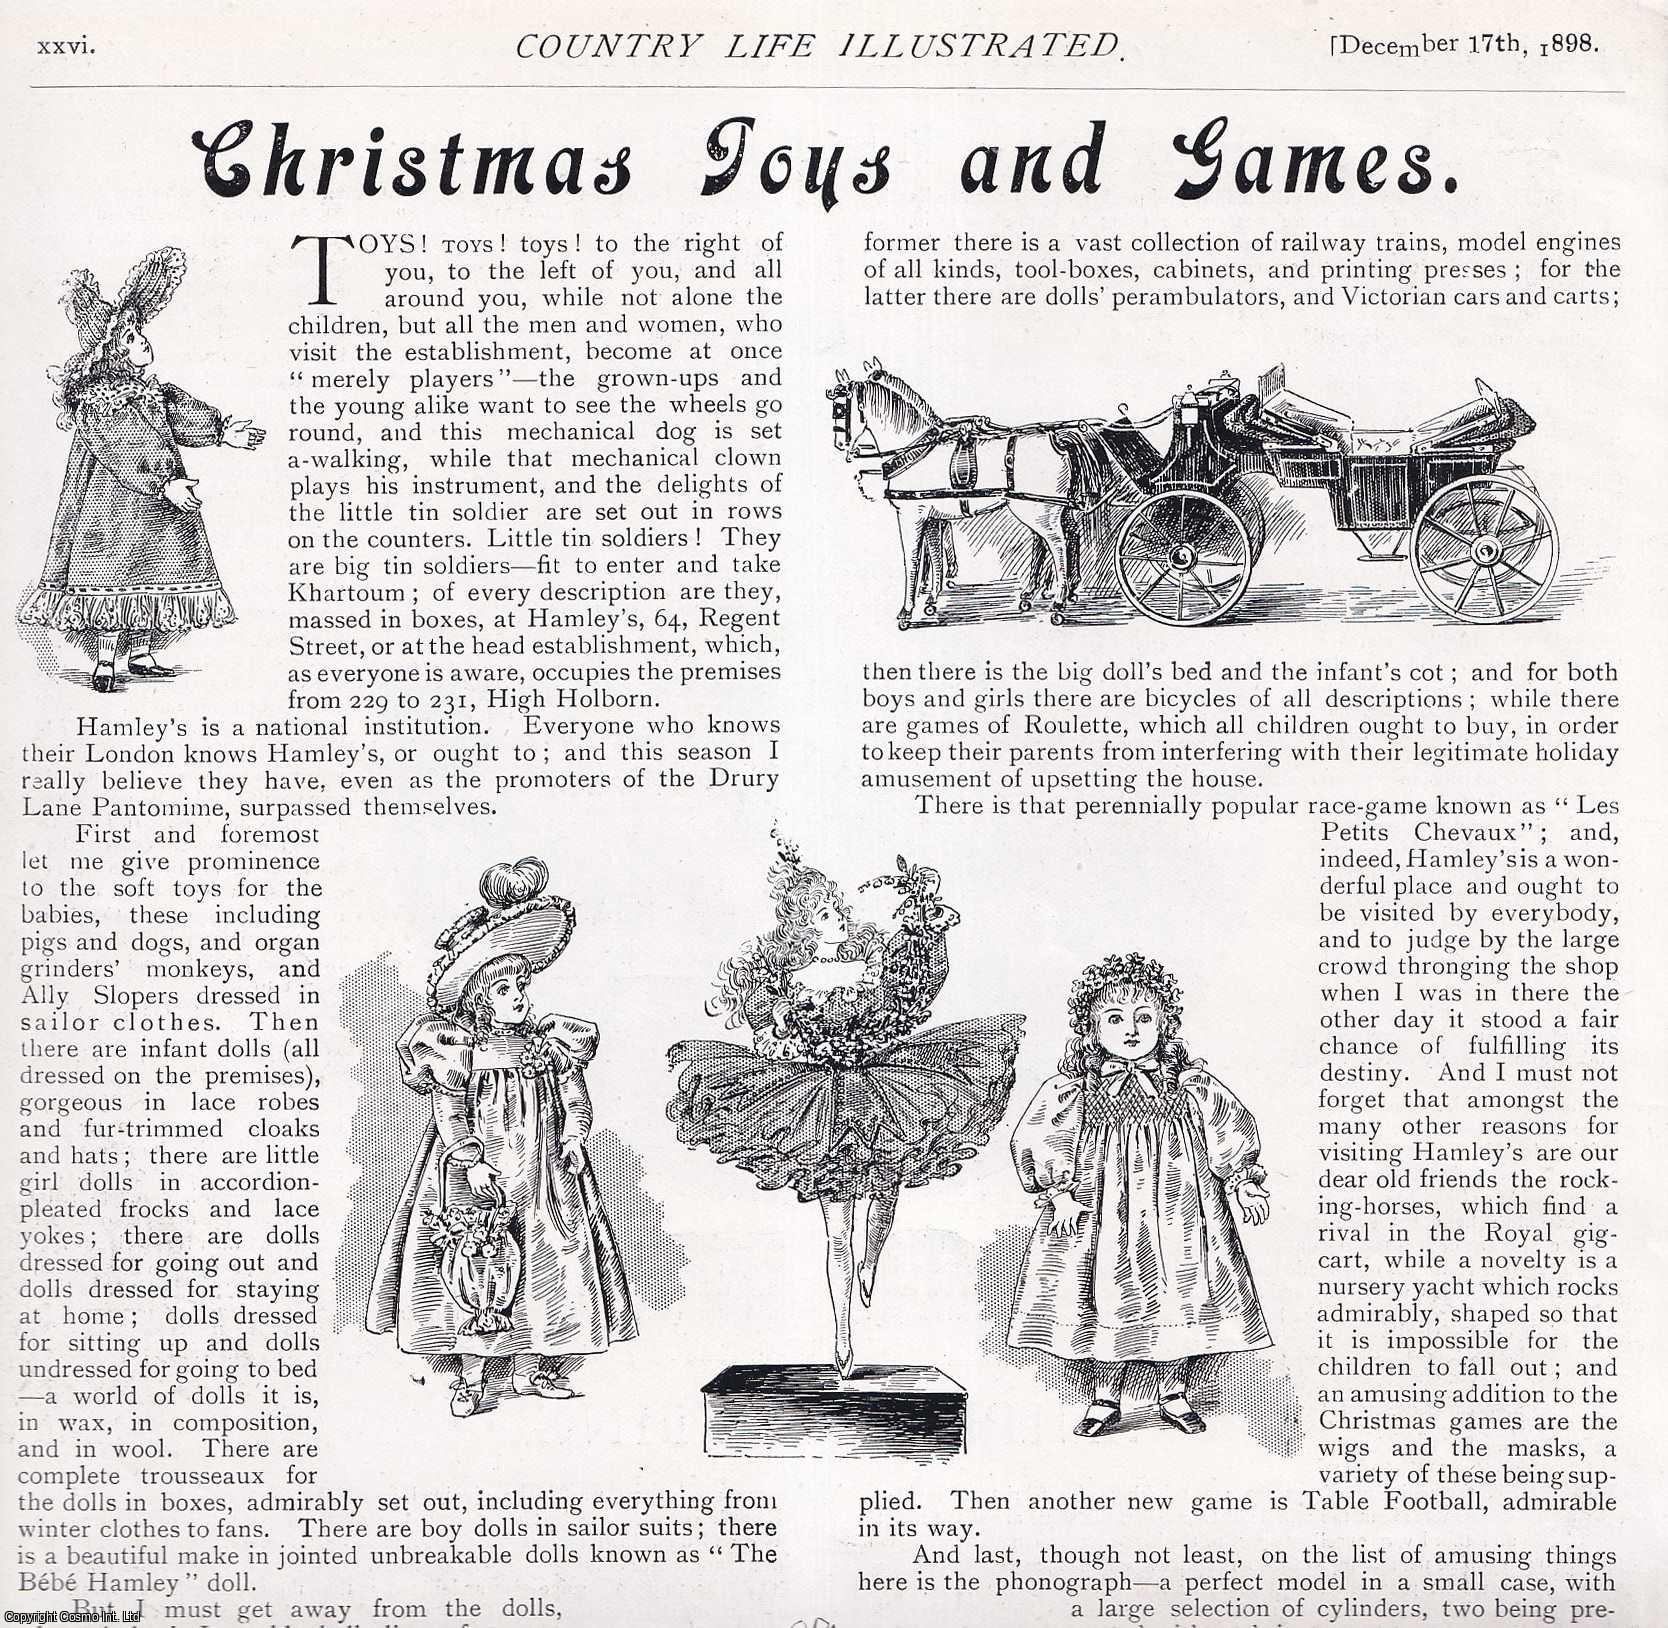 COUNTRY LIFE - Christmas Toys and Games. Several pictures and accompanying text, removed from an original issue of Country Life Magazine, 1898.